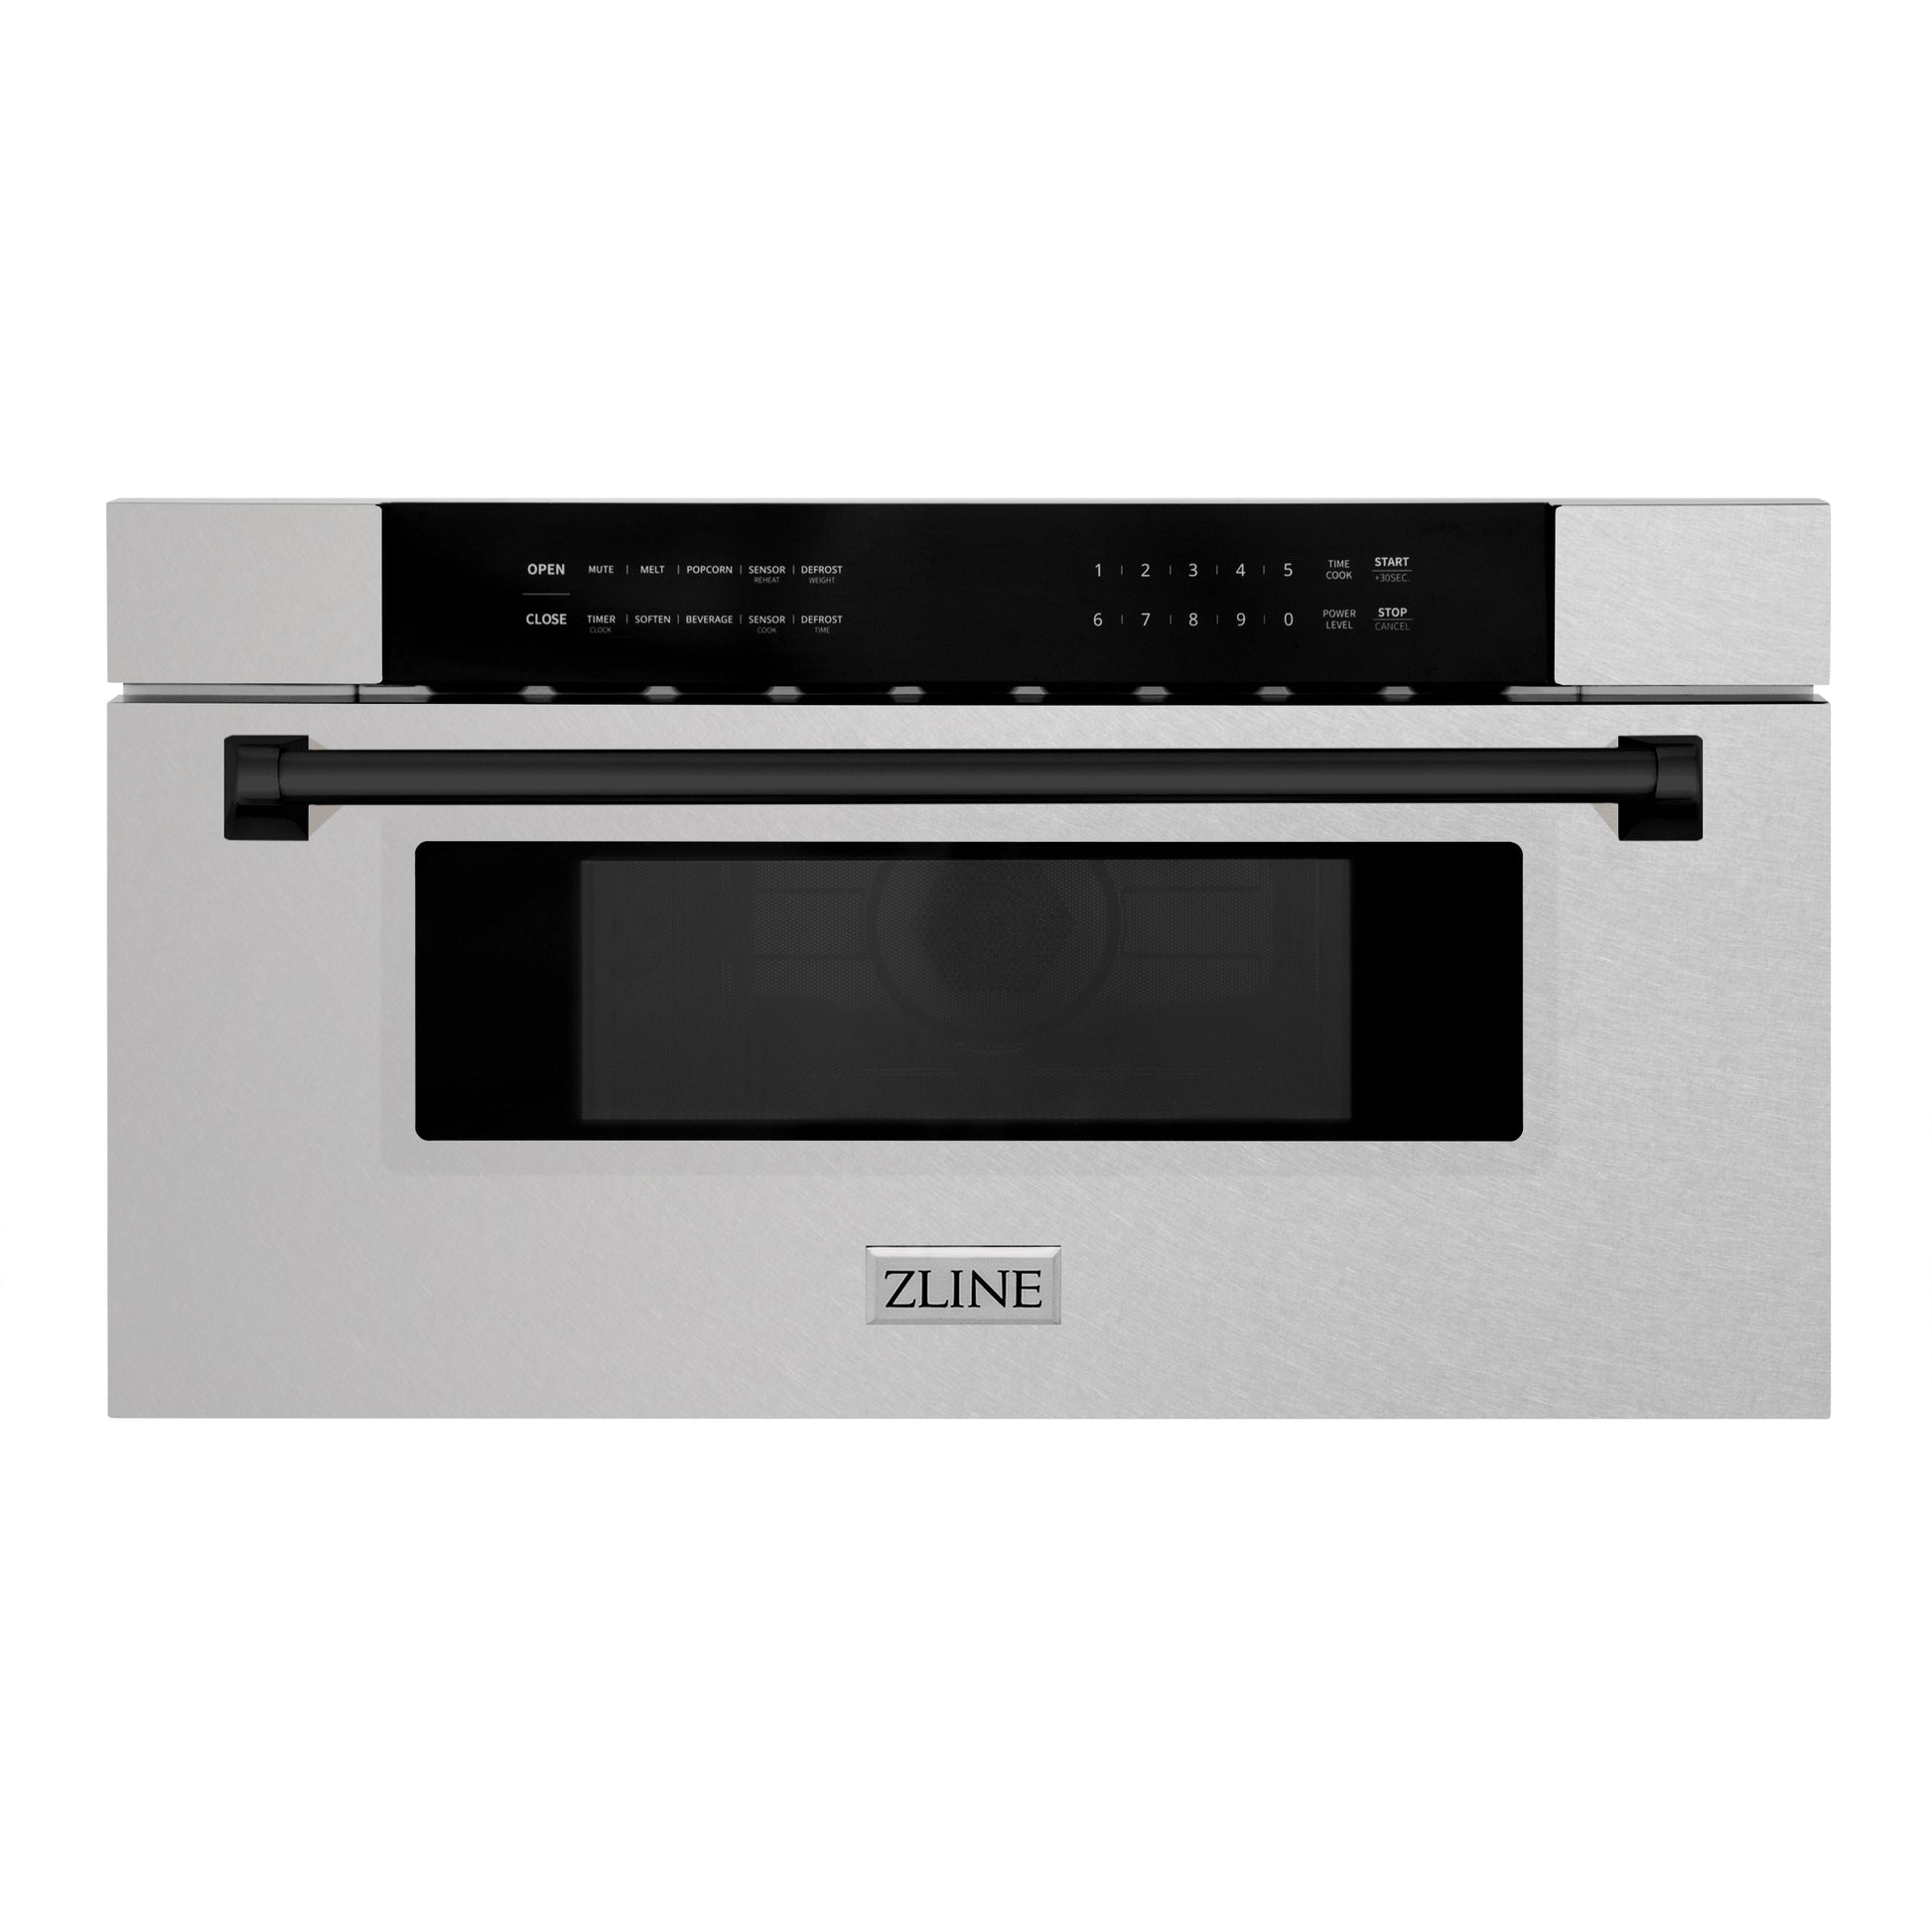 ZLINE Autograph Edition 30" Built-In Microwave Drawer - Fingerprint Resistant Stainless Steel with Accents